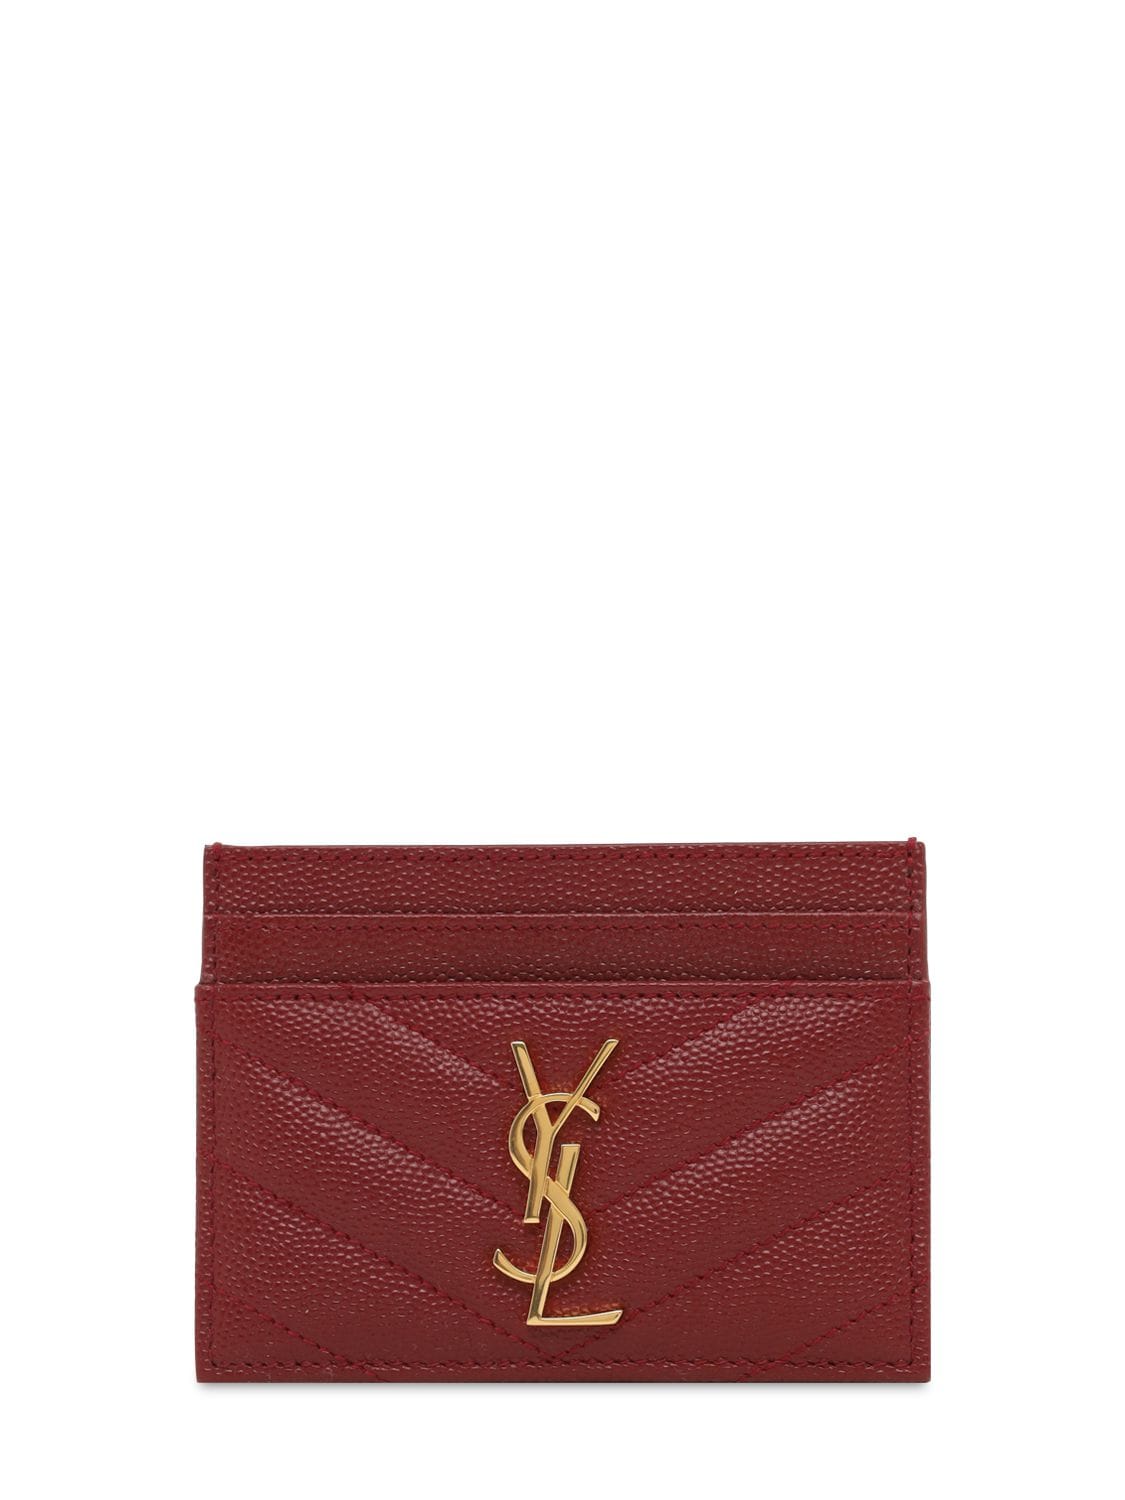 Saint Laurent Monogram Grained Leather Card Holder In Opyum Red | ModeSens